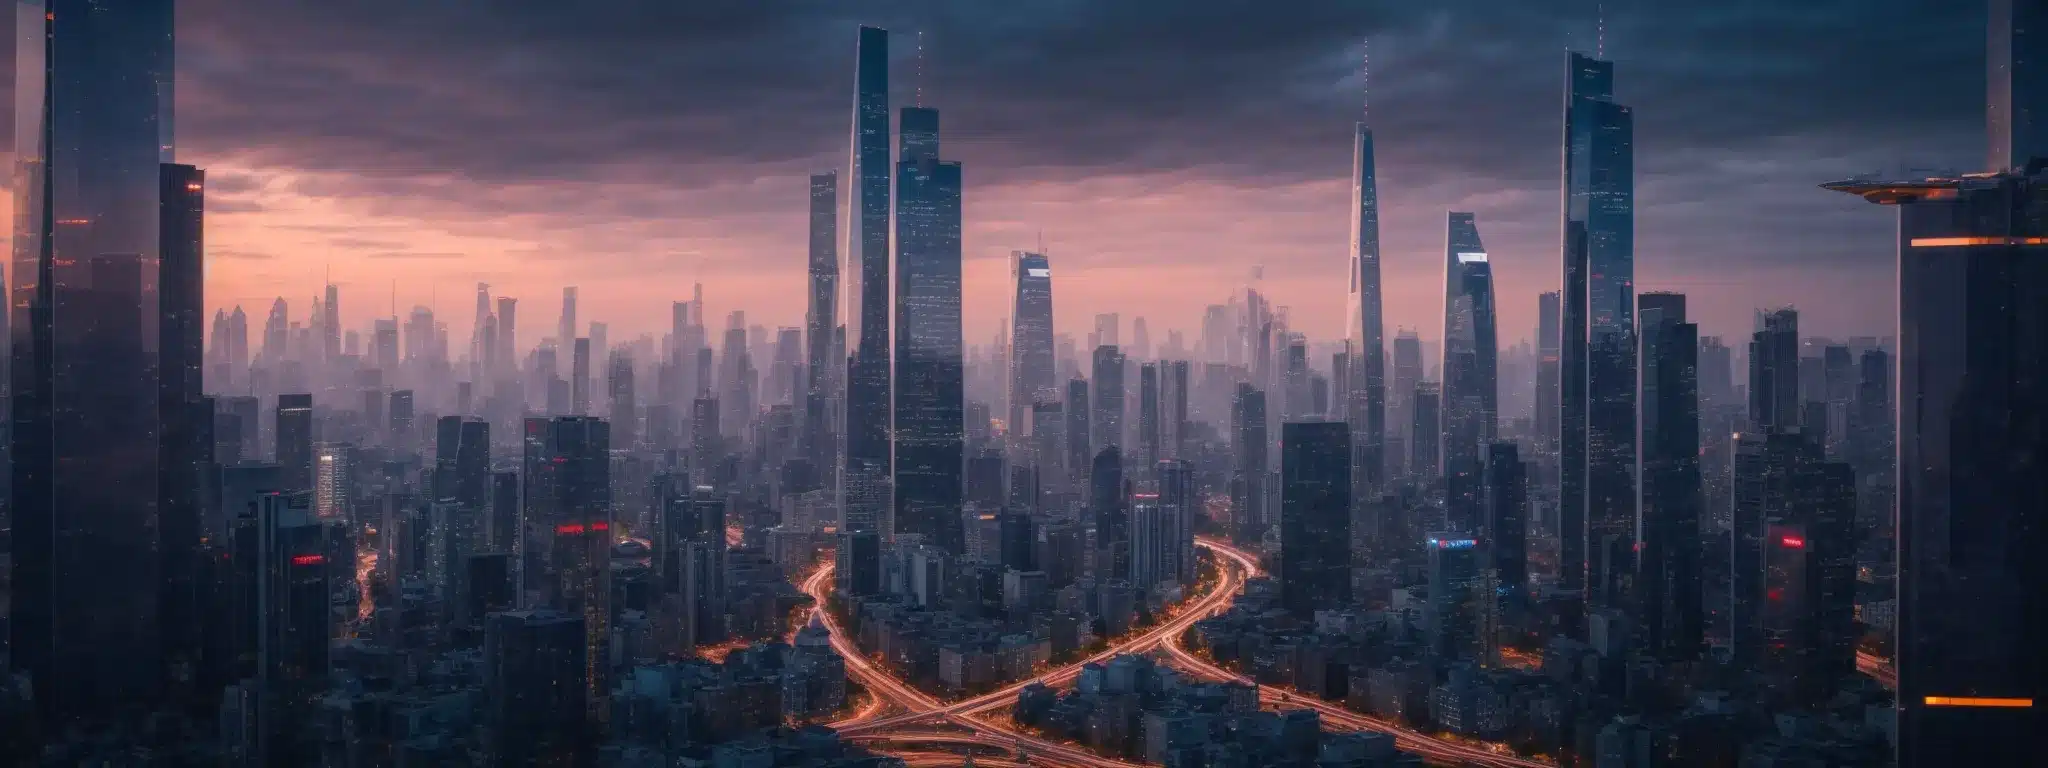 A Futuristic City Skyline At Twilight, Mirroring The Innovative Blend Of Technology And Consumer Trends That Shape Brand Strategies.